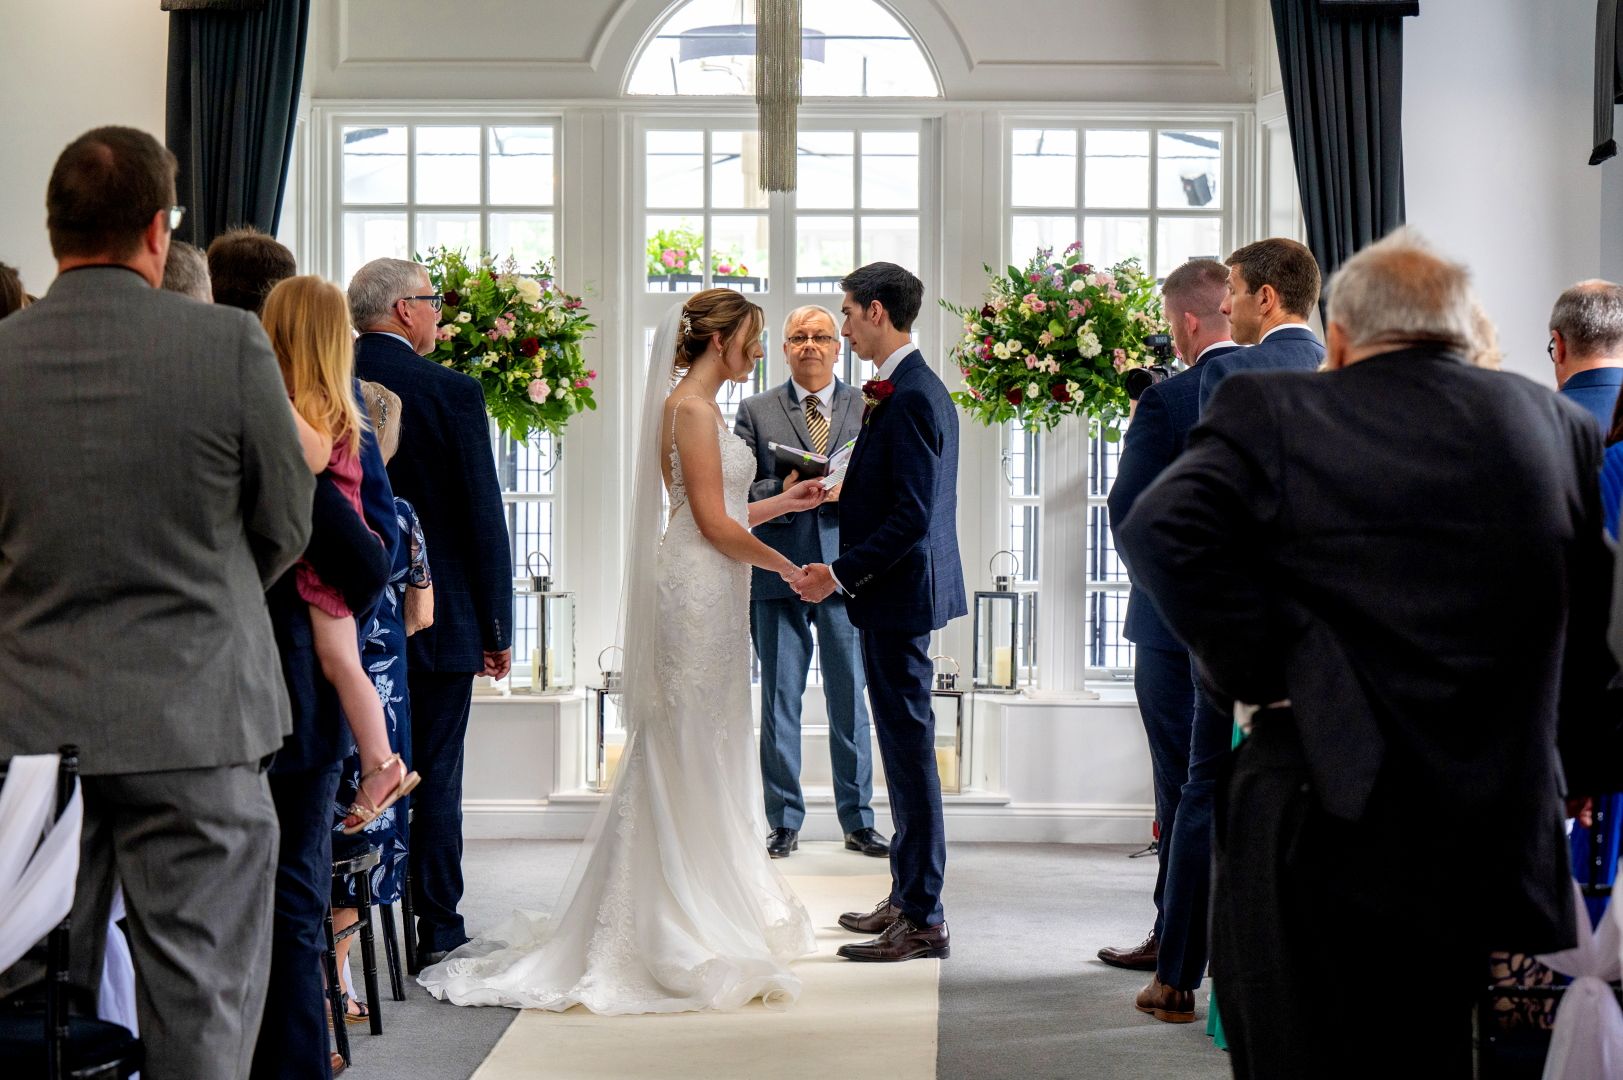 Sophie and Ross making their wedding vows to each other at Swynford Manor. Photo thanks to Fountain Photography.